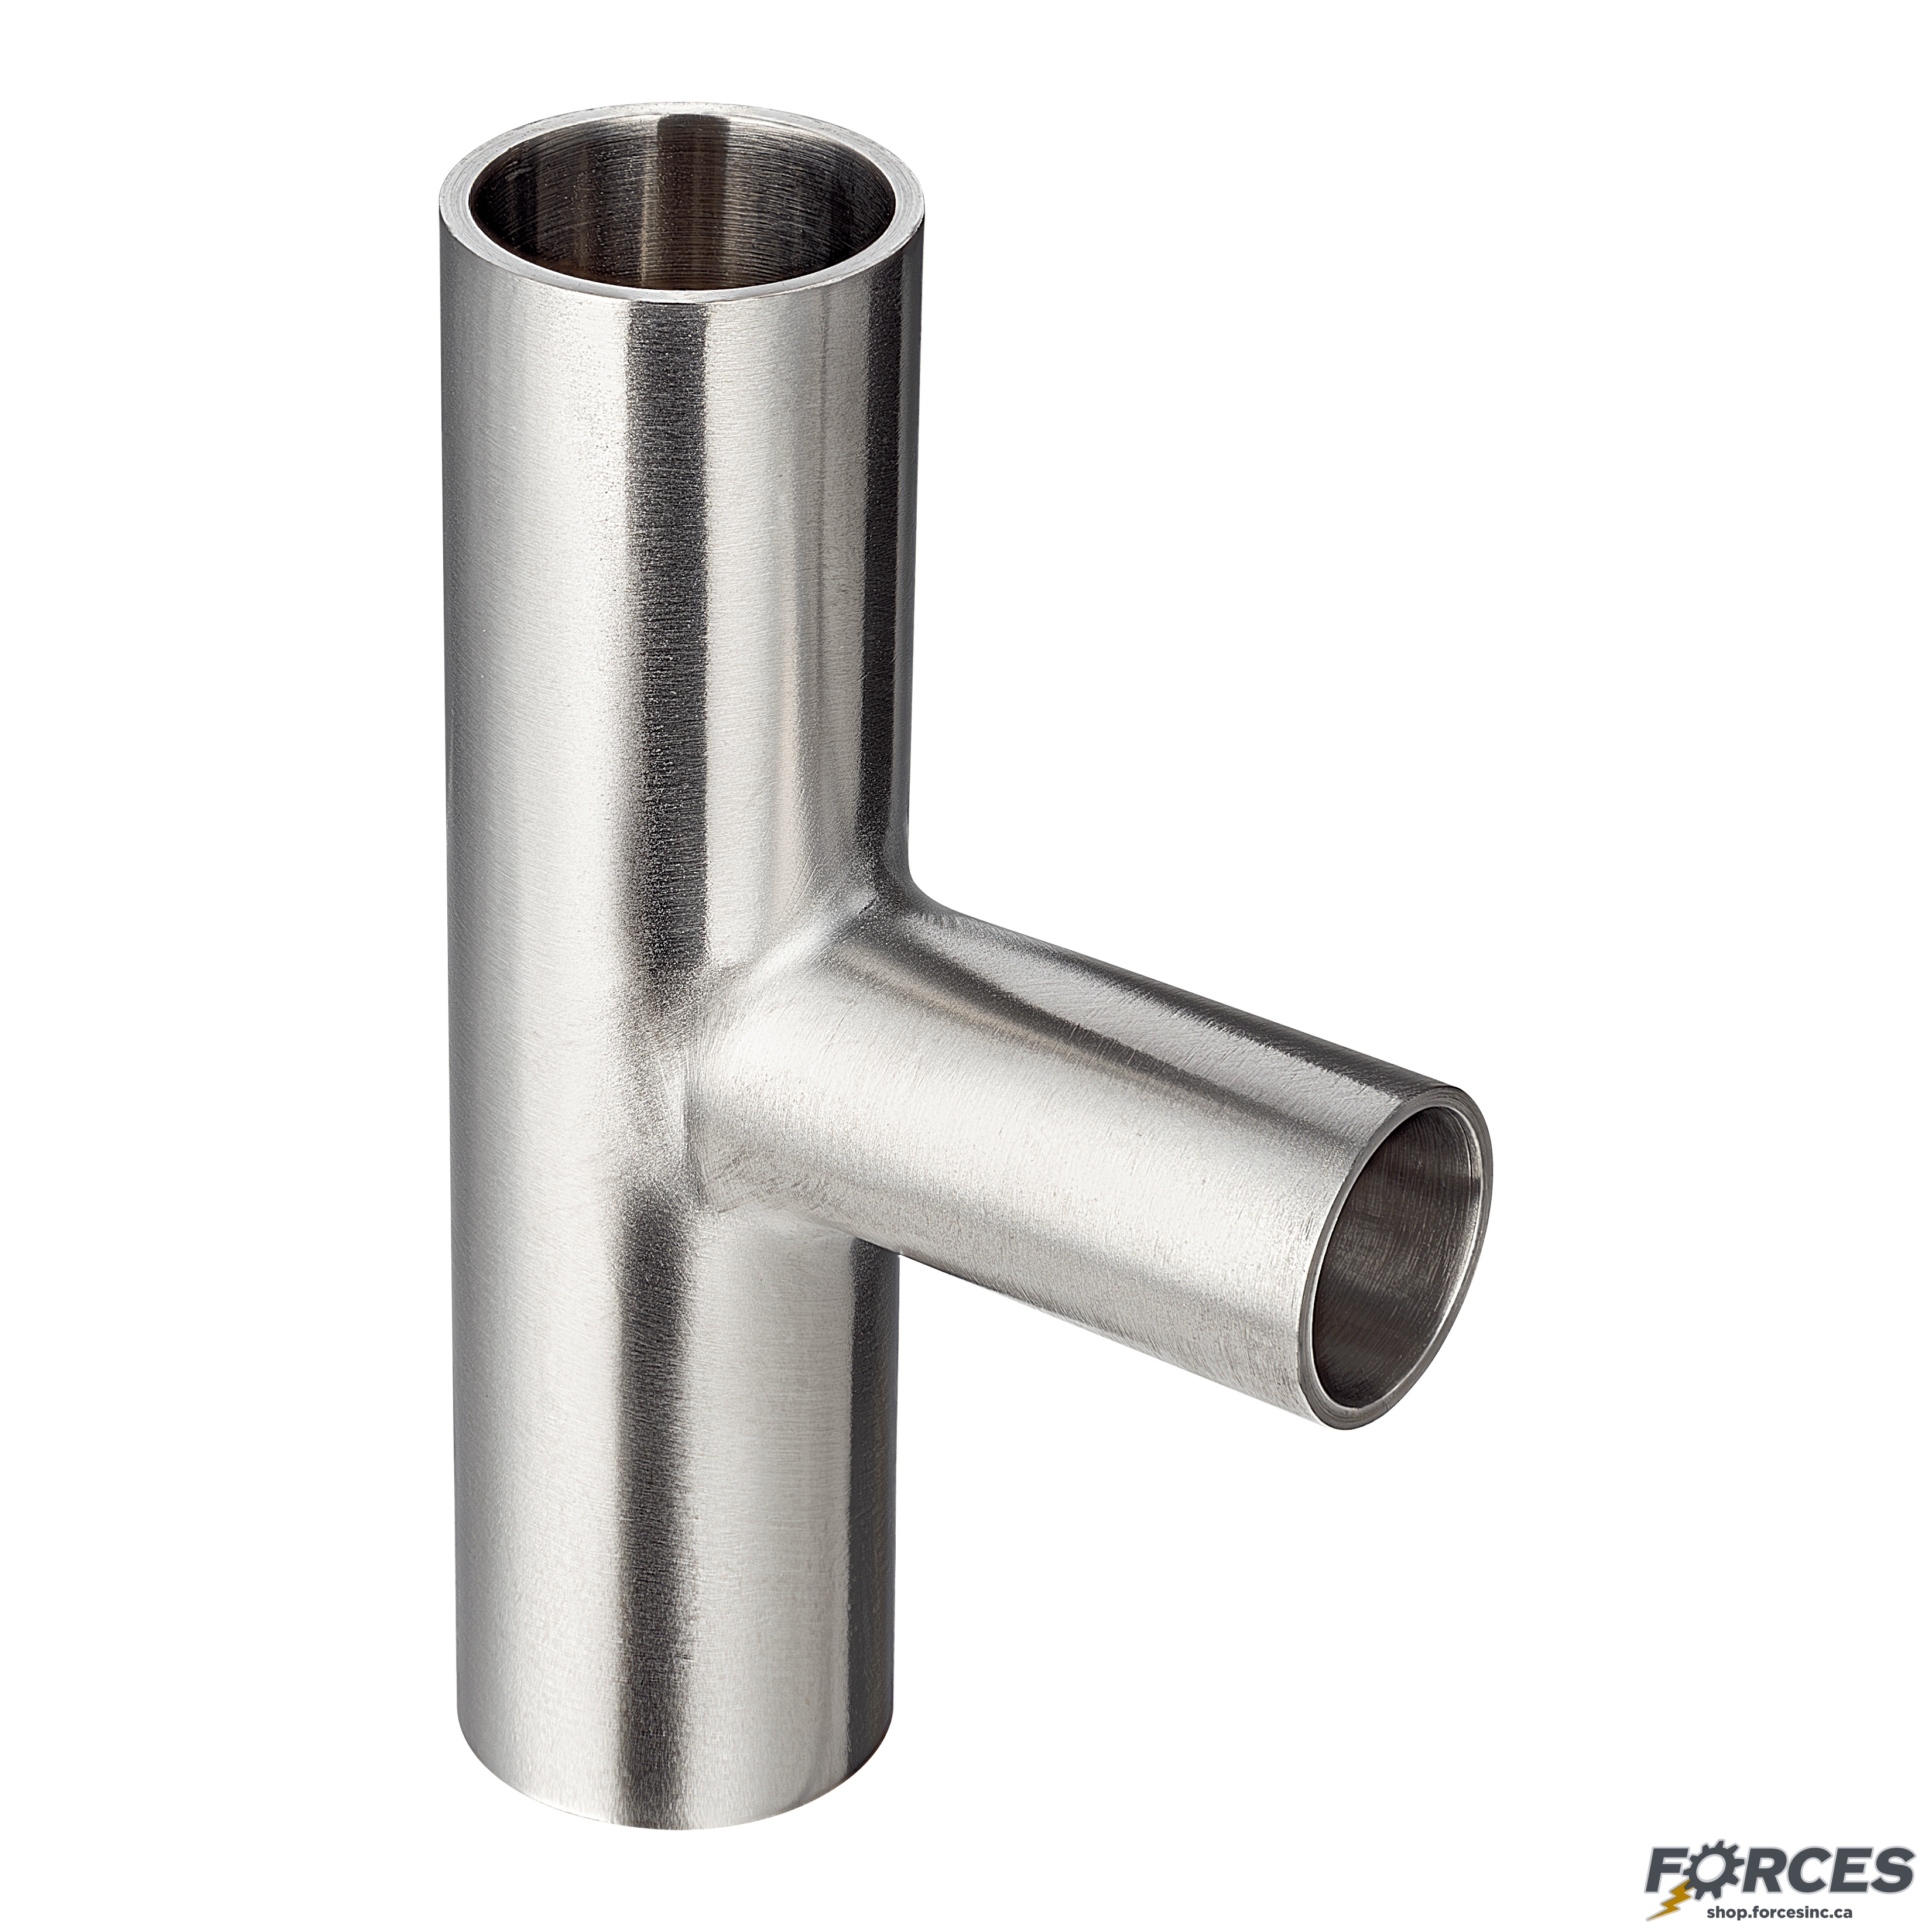 4" x 2" Butt Weld Tee Reducer - Stainless Steel 316 - Forces Inc